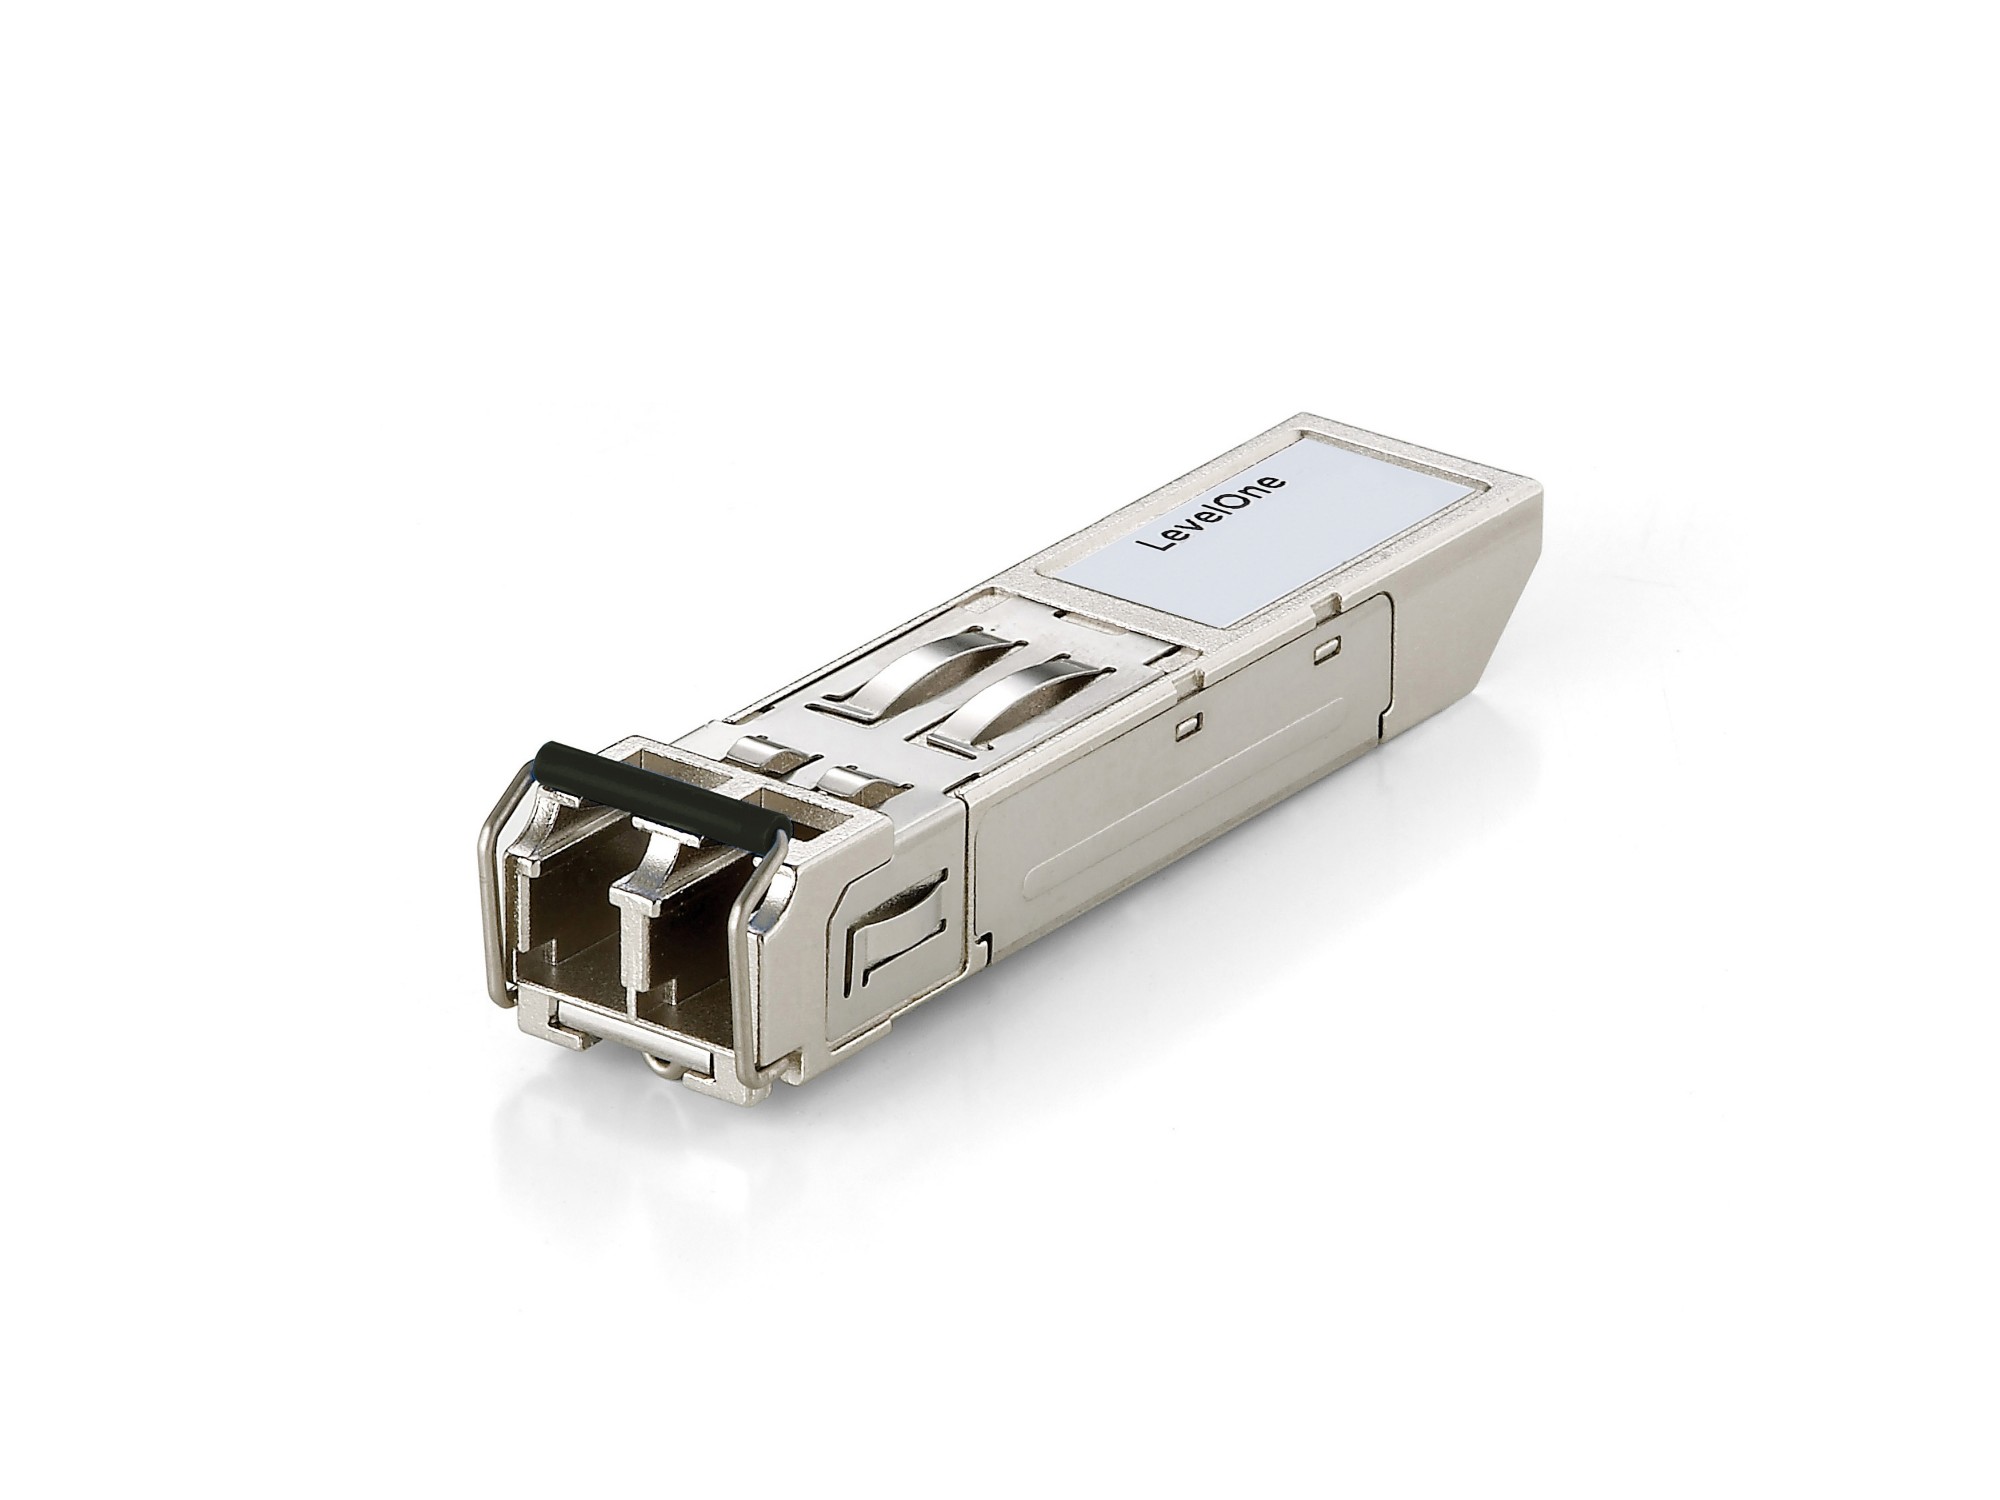 LevelOne 125Mbps Multi-mode Industrial SFP Transceiver, 2km, 1310nm, -40°C to 85°C